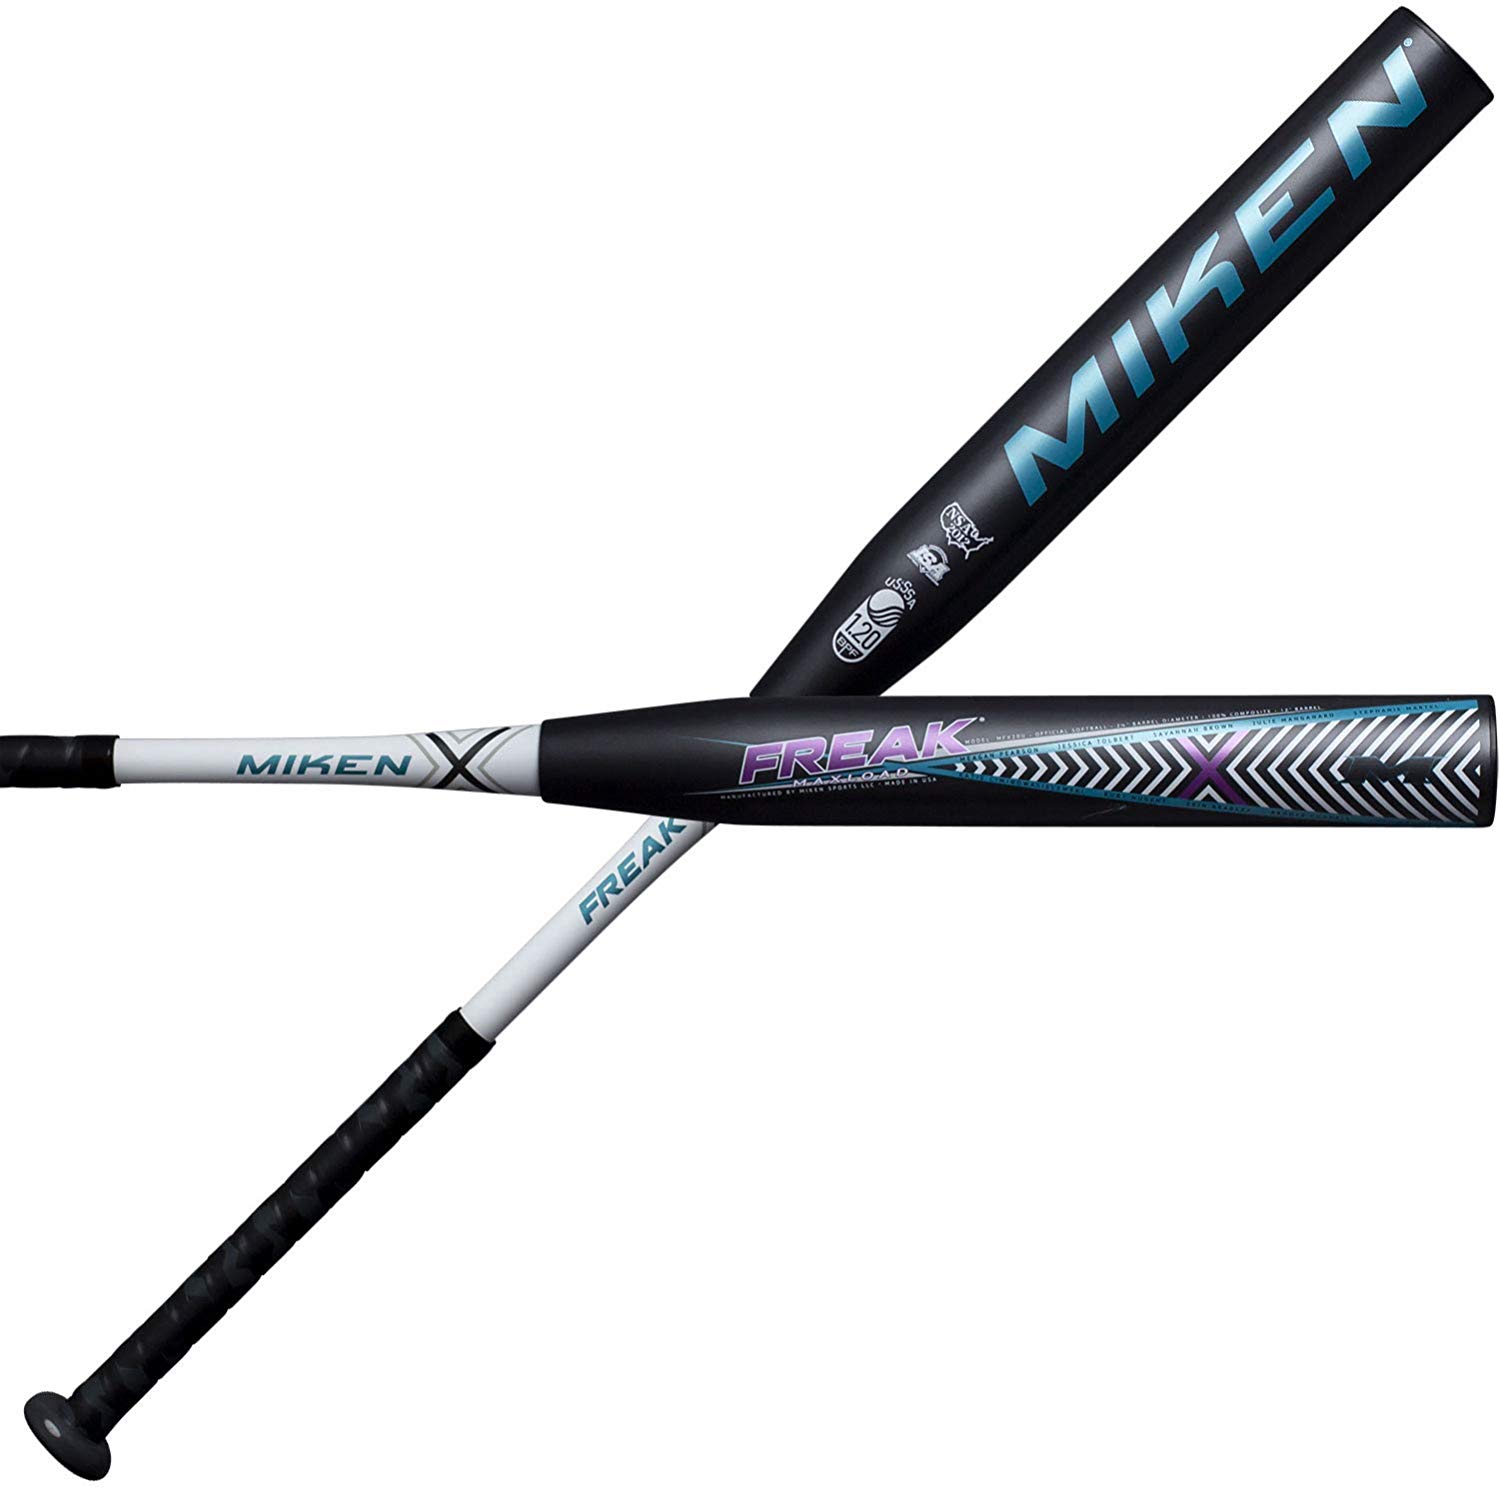 EXTENDED SWEET SPOT AND INCREASED FLEX due to 14 inch barrel, F2P Barrel Flex Technology, and revolutionary 100 COMP composite fibers that will also deliver legendary performance and durability INCREASED POWER THROUGH THE HITTING ZONE due to 0.5 oz maxload on the end of the bat 2.25 inch barrel diameter, 12 inch barrel length, 24oz bat weight APPROVED FOR PLAY IN ALL USSSA LEAGUES.